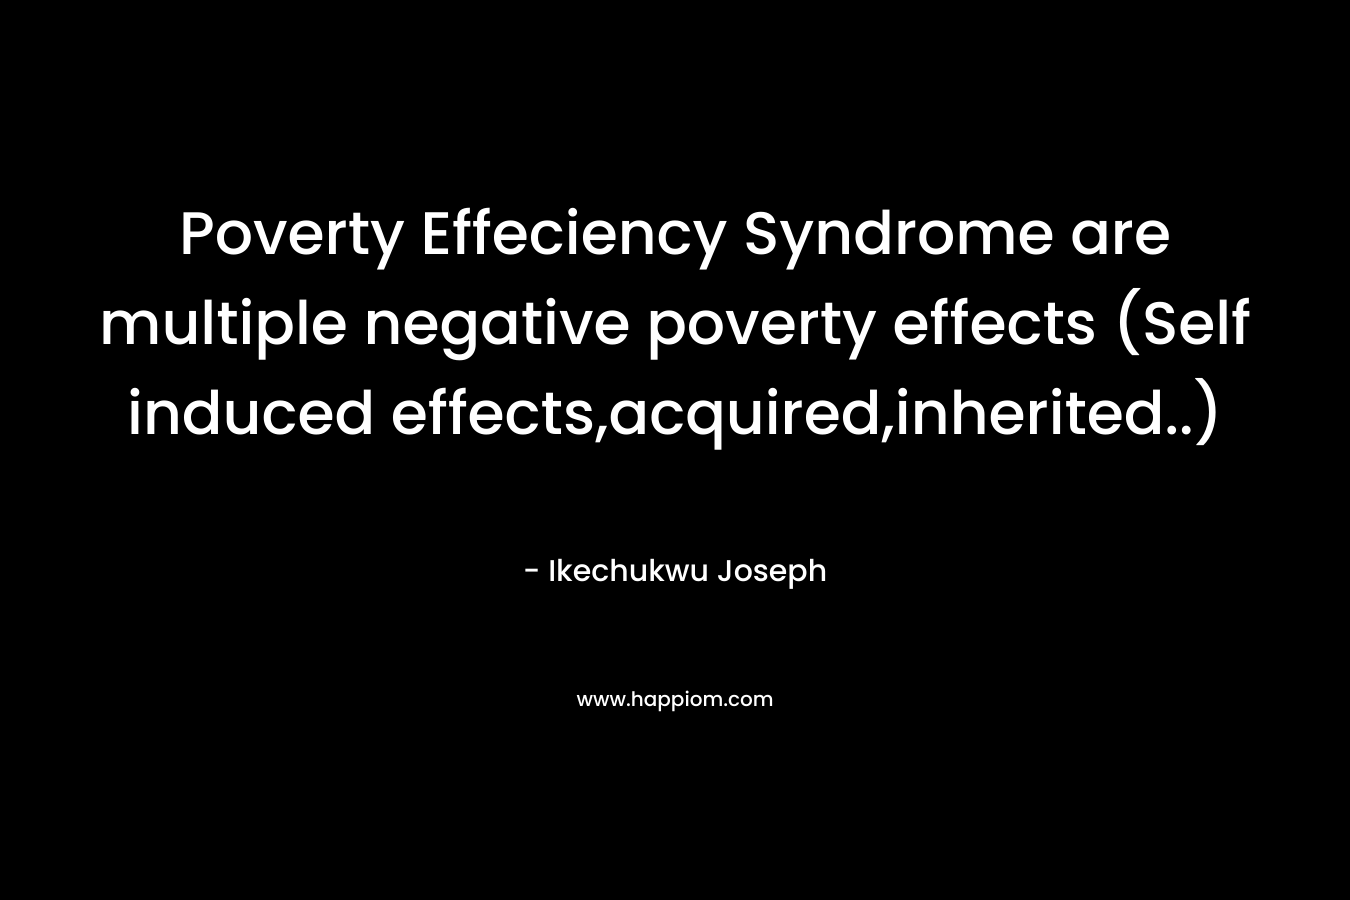 Poverty Effeciency Syndrome are multiple negative poverty effects (Self induced effects,acquired,inherited..)